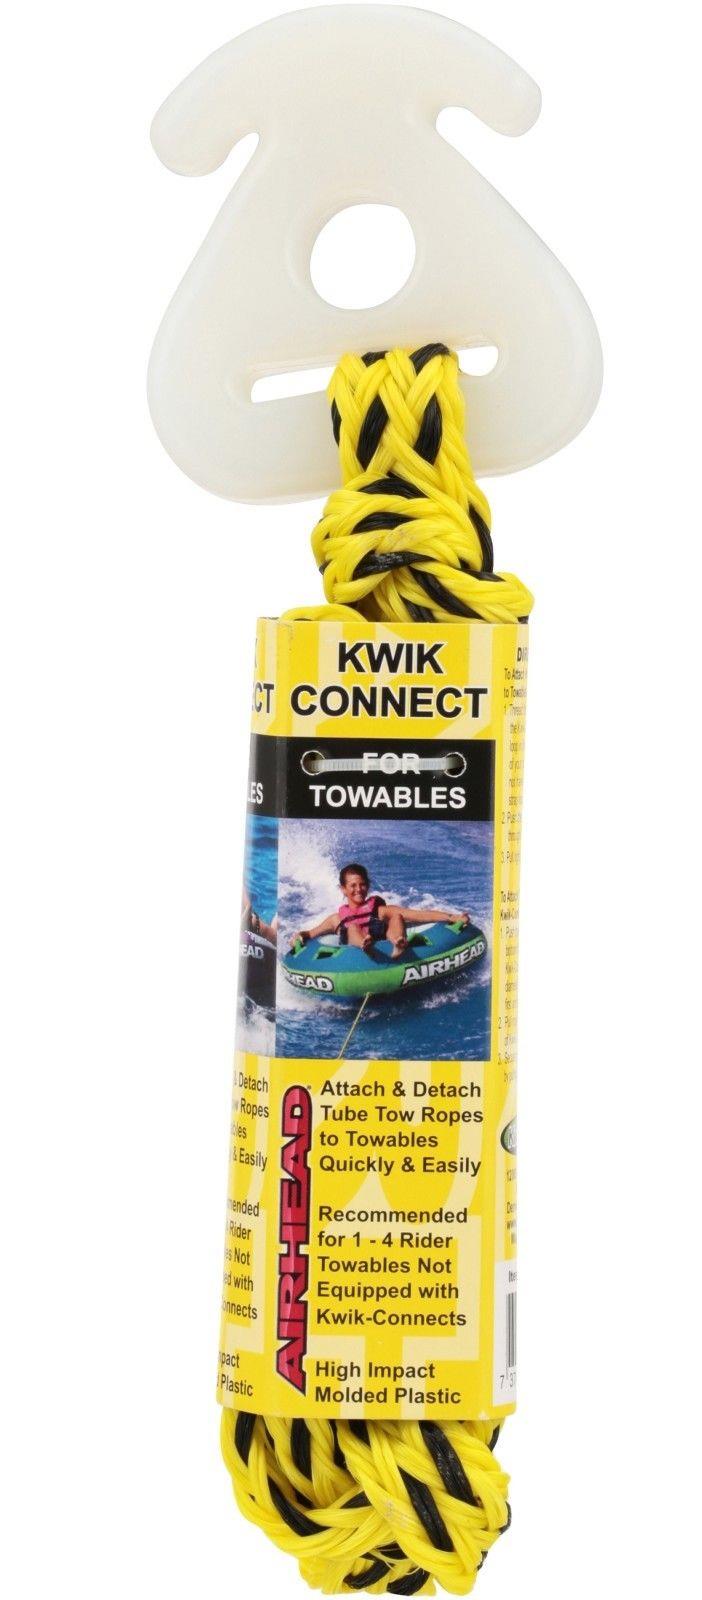 Airhead Kwik Connect Boat Tube Tow Ropes Recommended for 1 to 4 Rider Towables